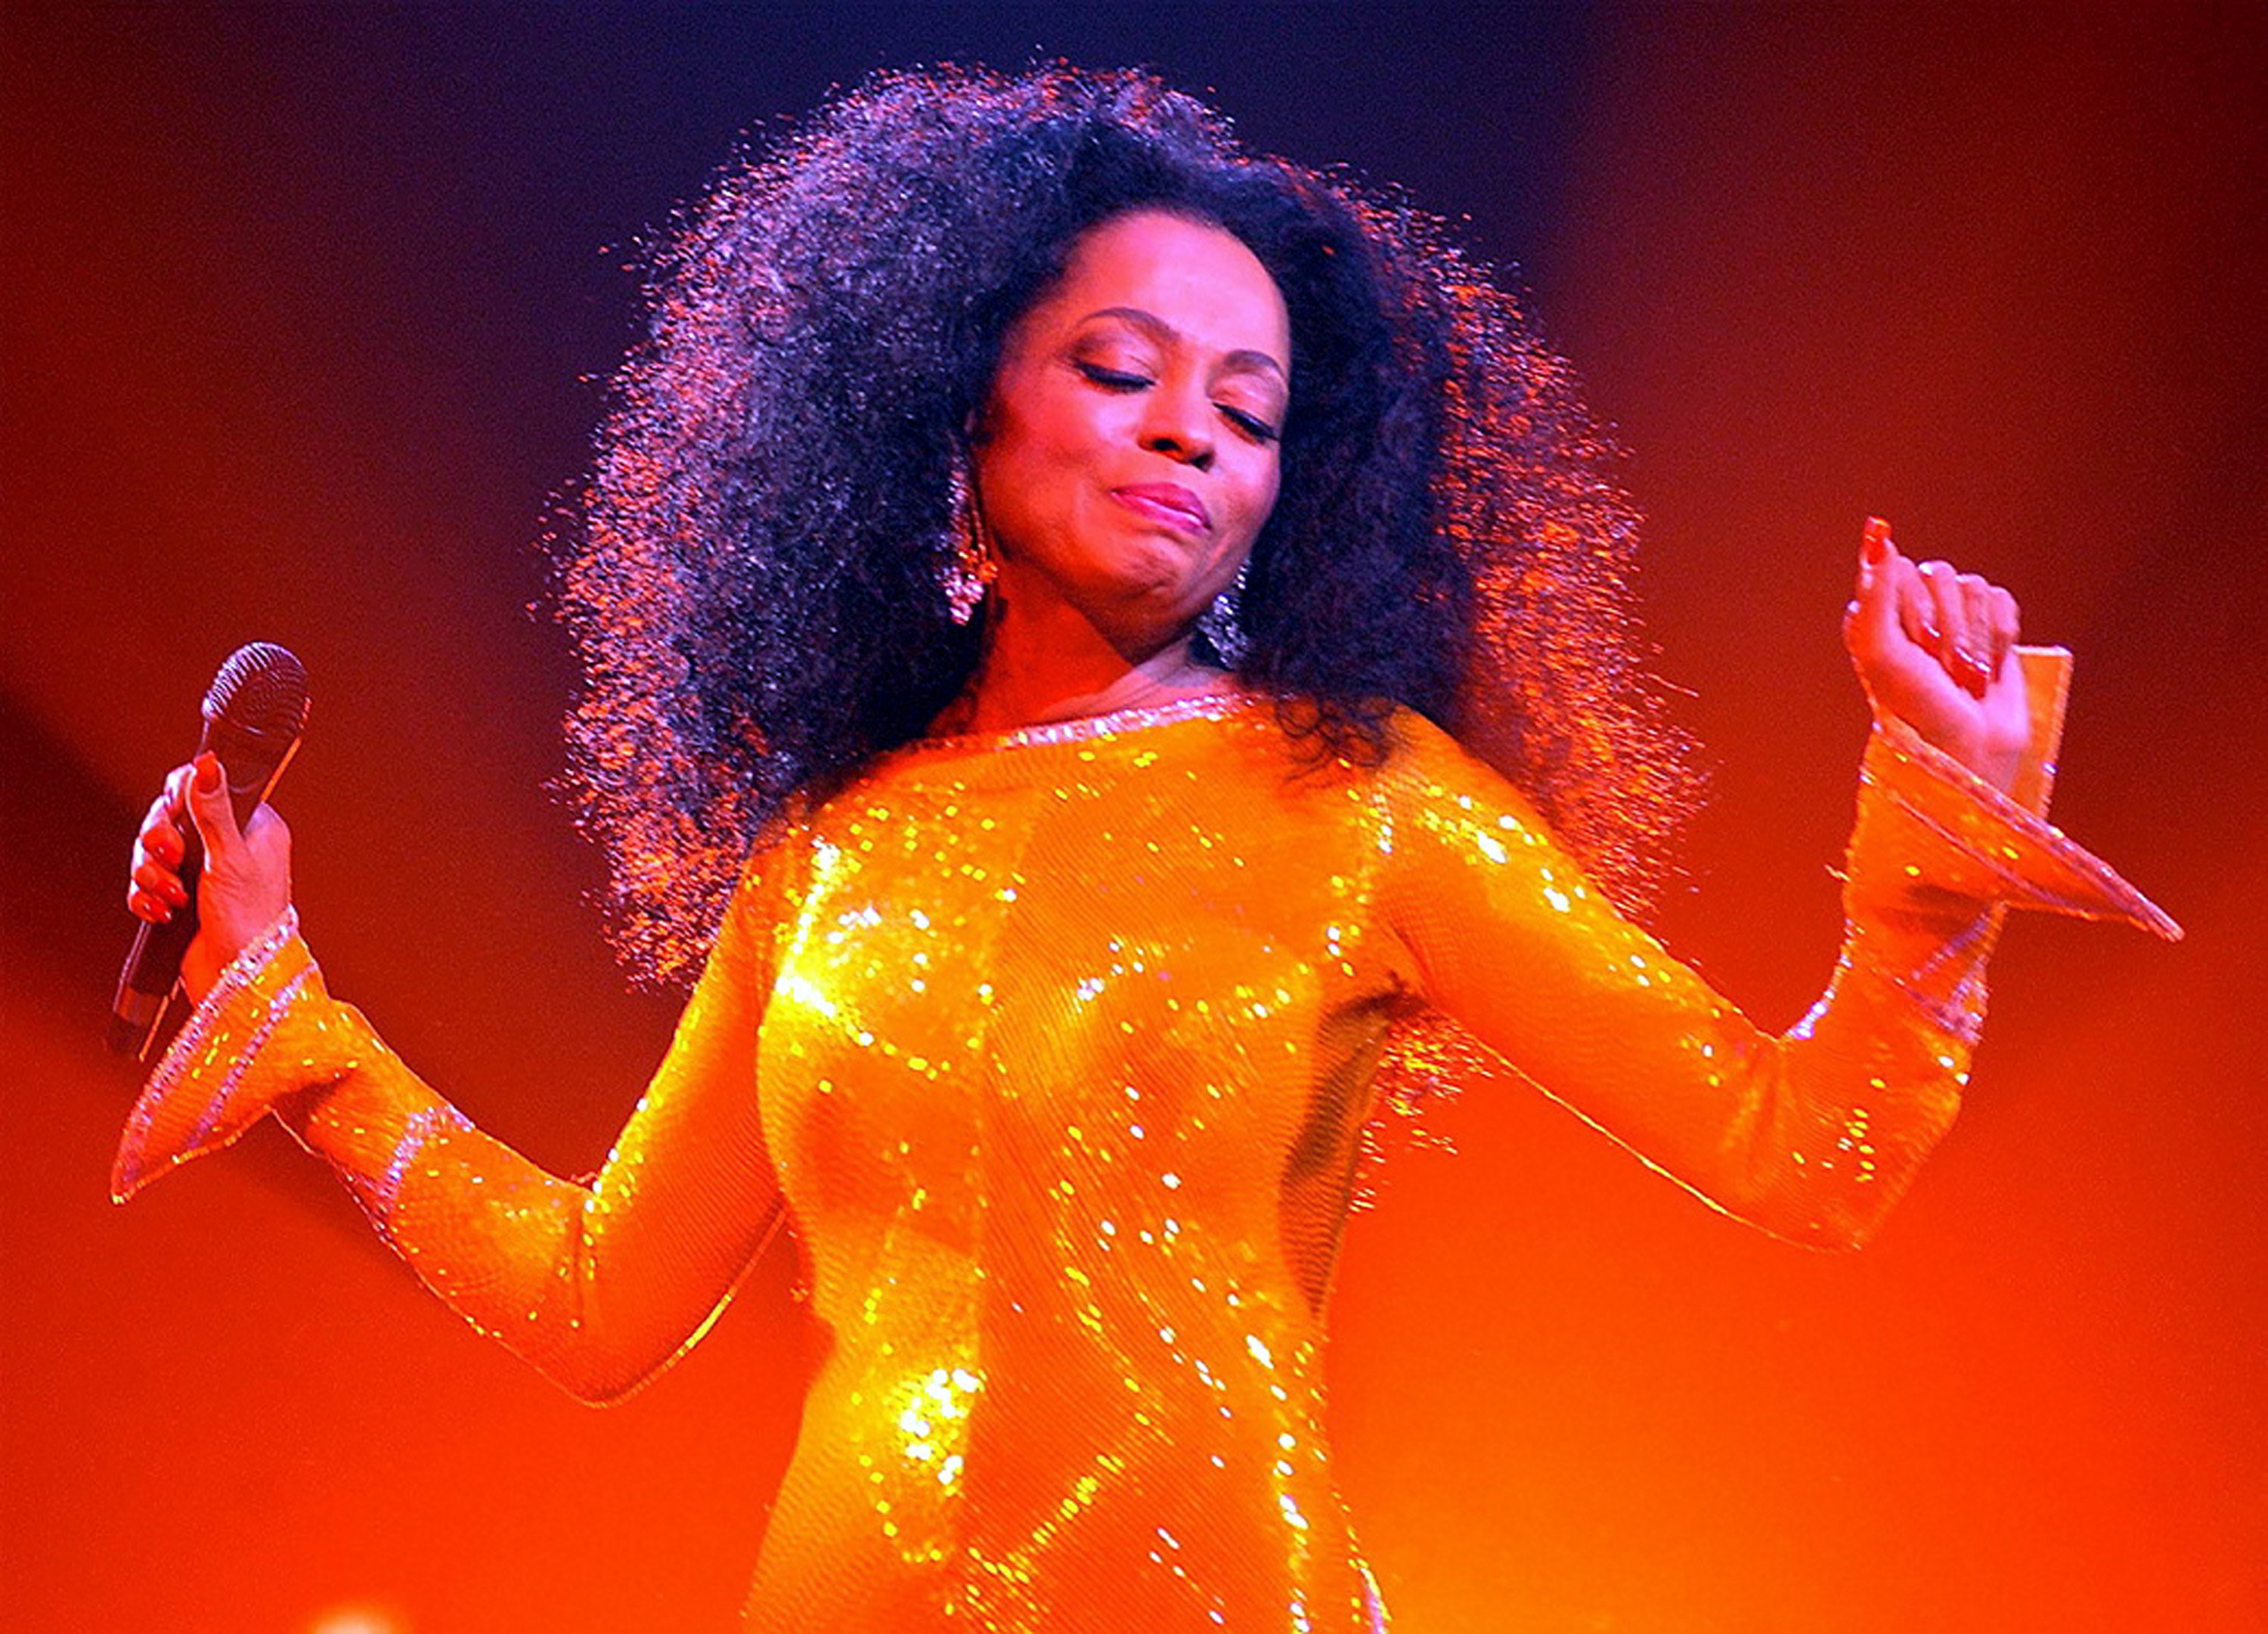 Diana Ross performing onstage in an orange sequined gown.